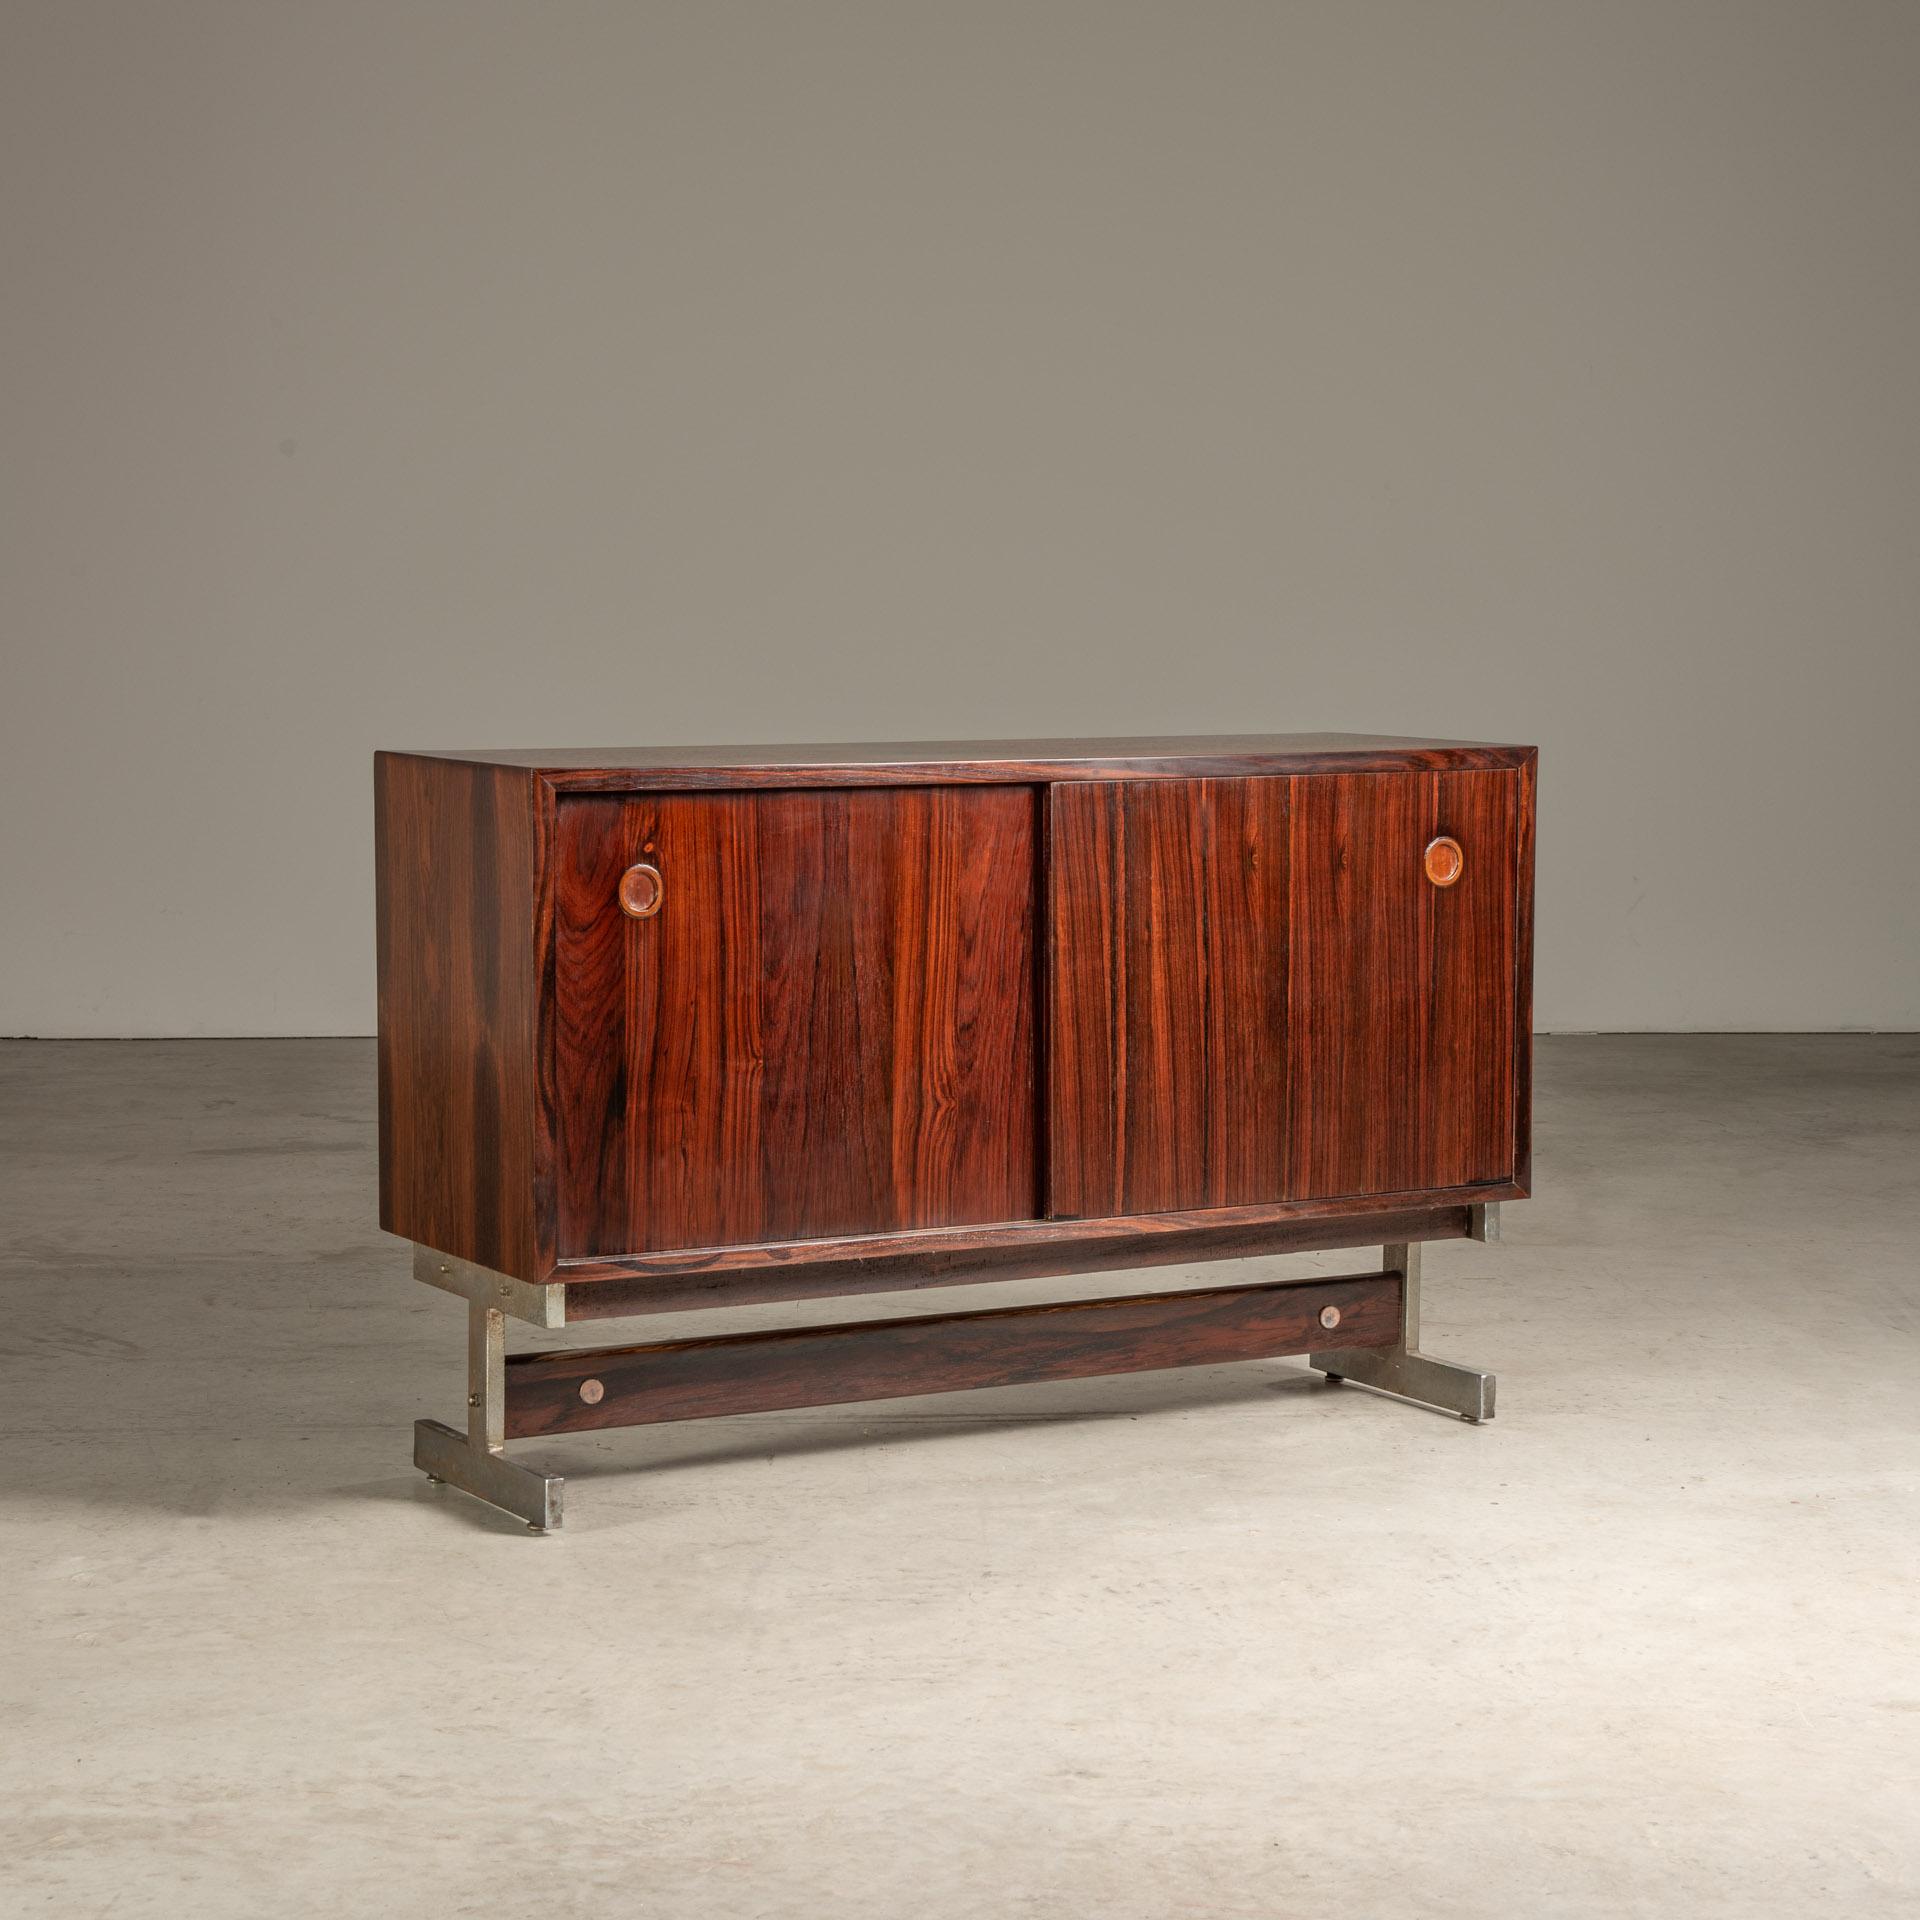 This meticulously crafted sideboard by Sergio Rodrigues is a paradigm of Brazilian mid-century modern design, seamlessly integrating functionality with a striking aesthetic. The structure stands on a robust yet elegantly minimal steel frame, which